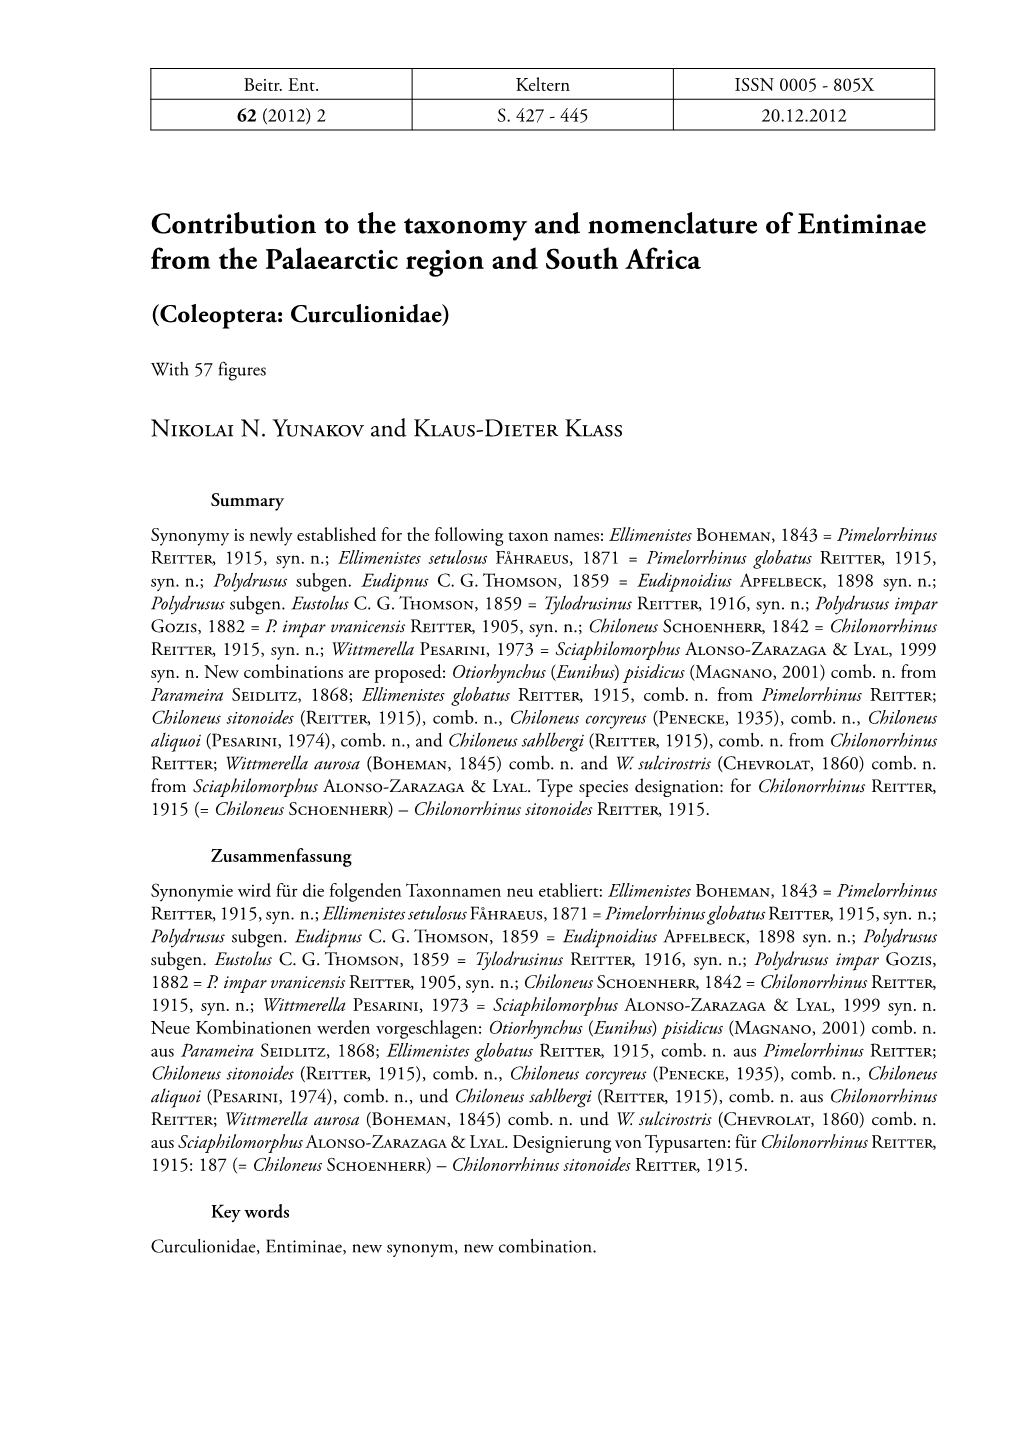 Contribution to the Taxonomy and Nomenclature of Entiminae from the Palaearctic Region and South Africa